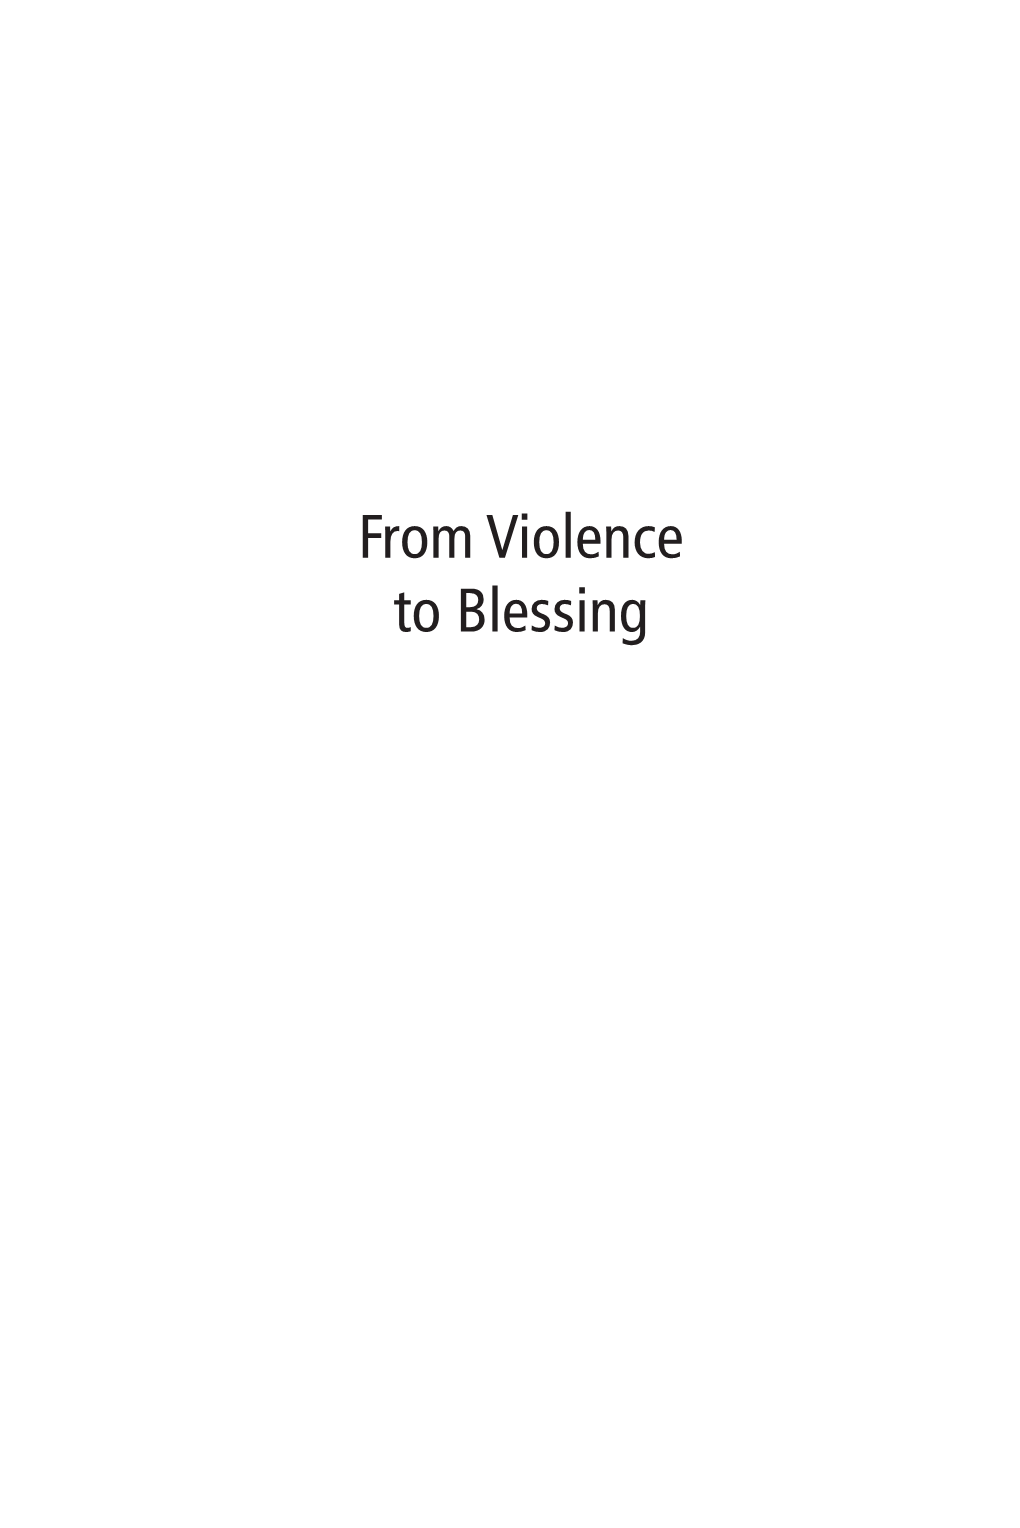 From Violence to Blessing